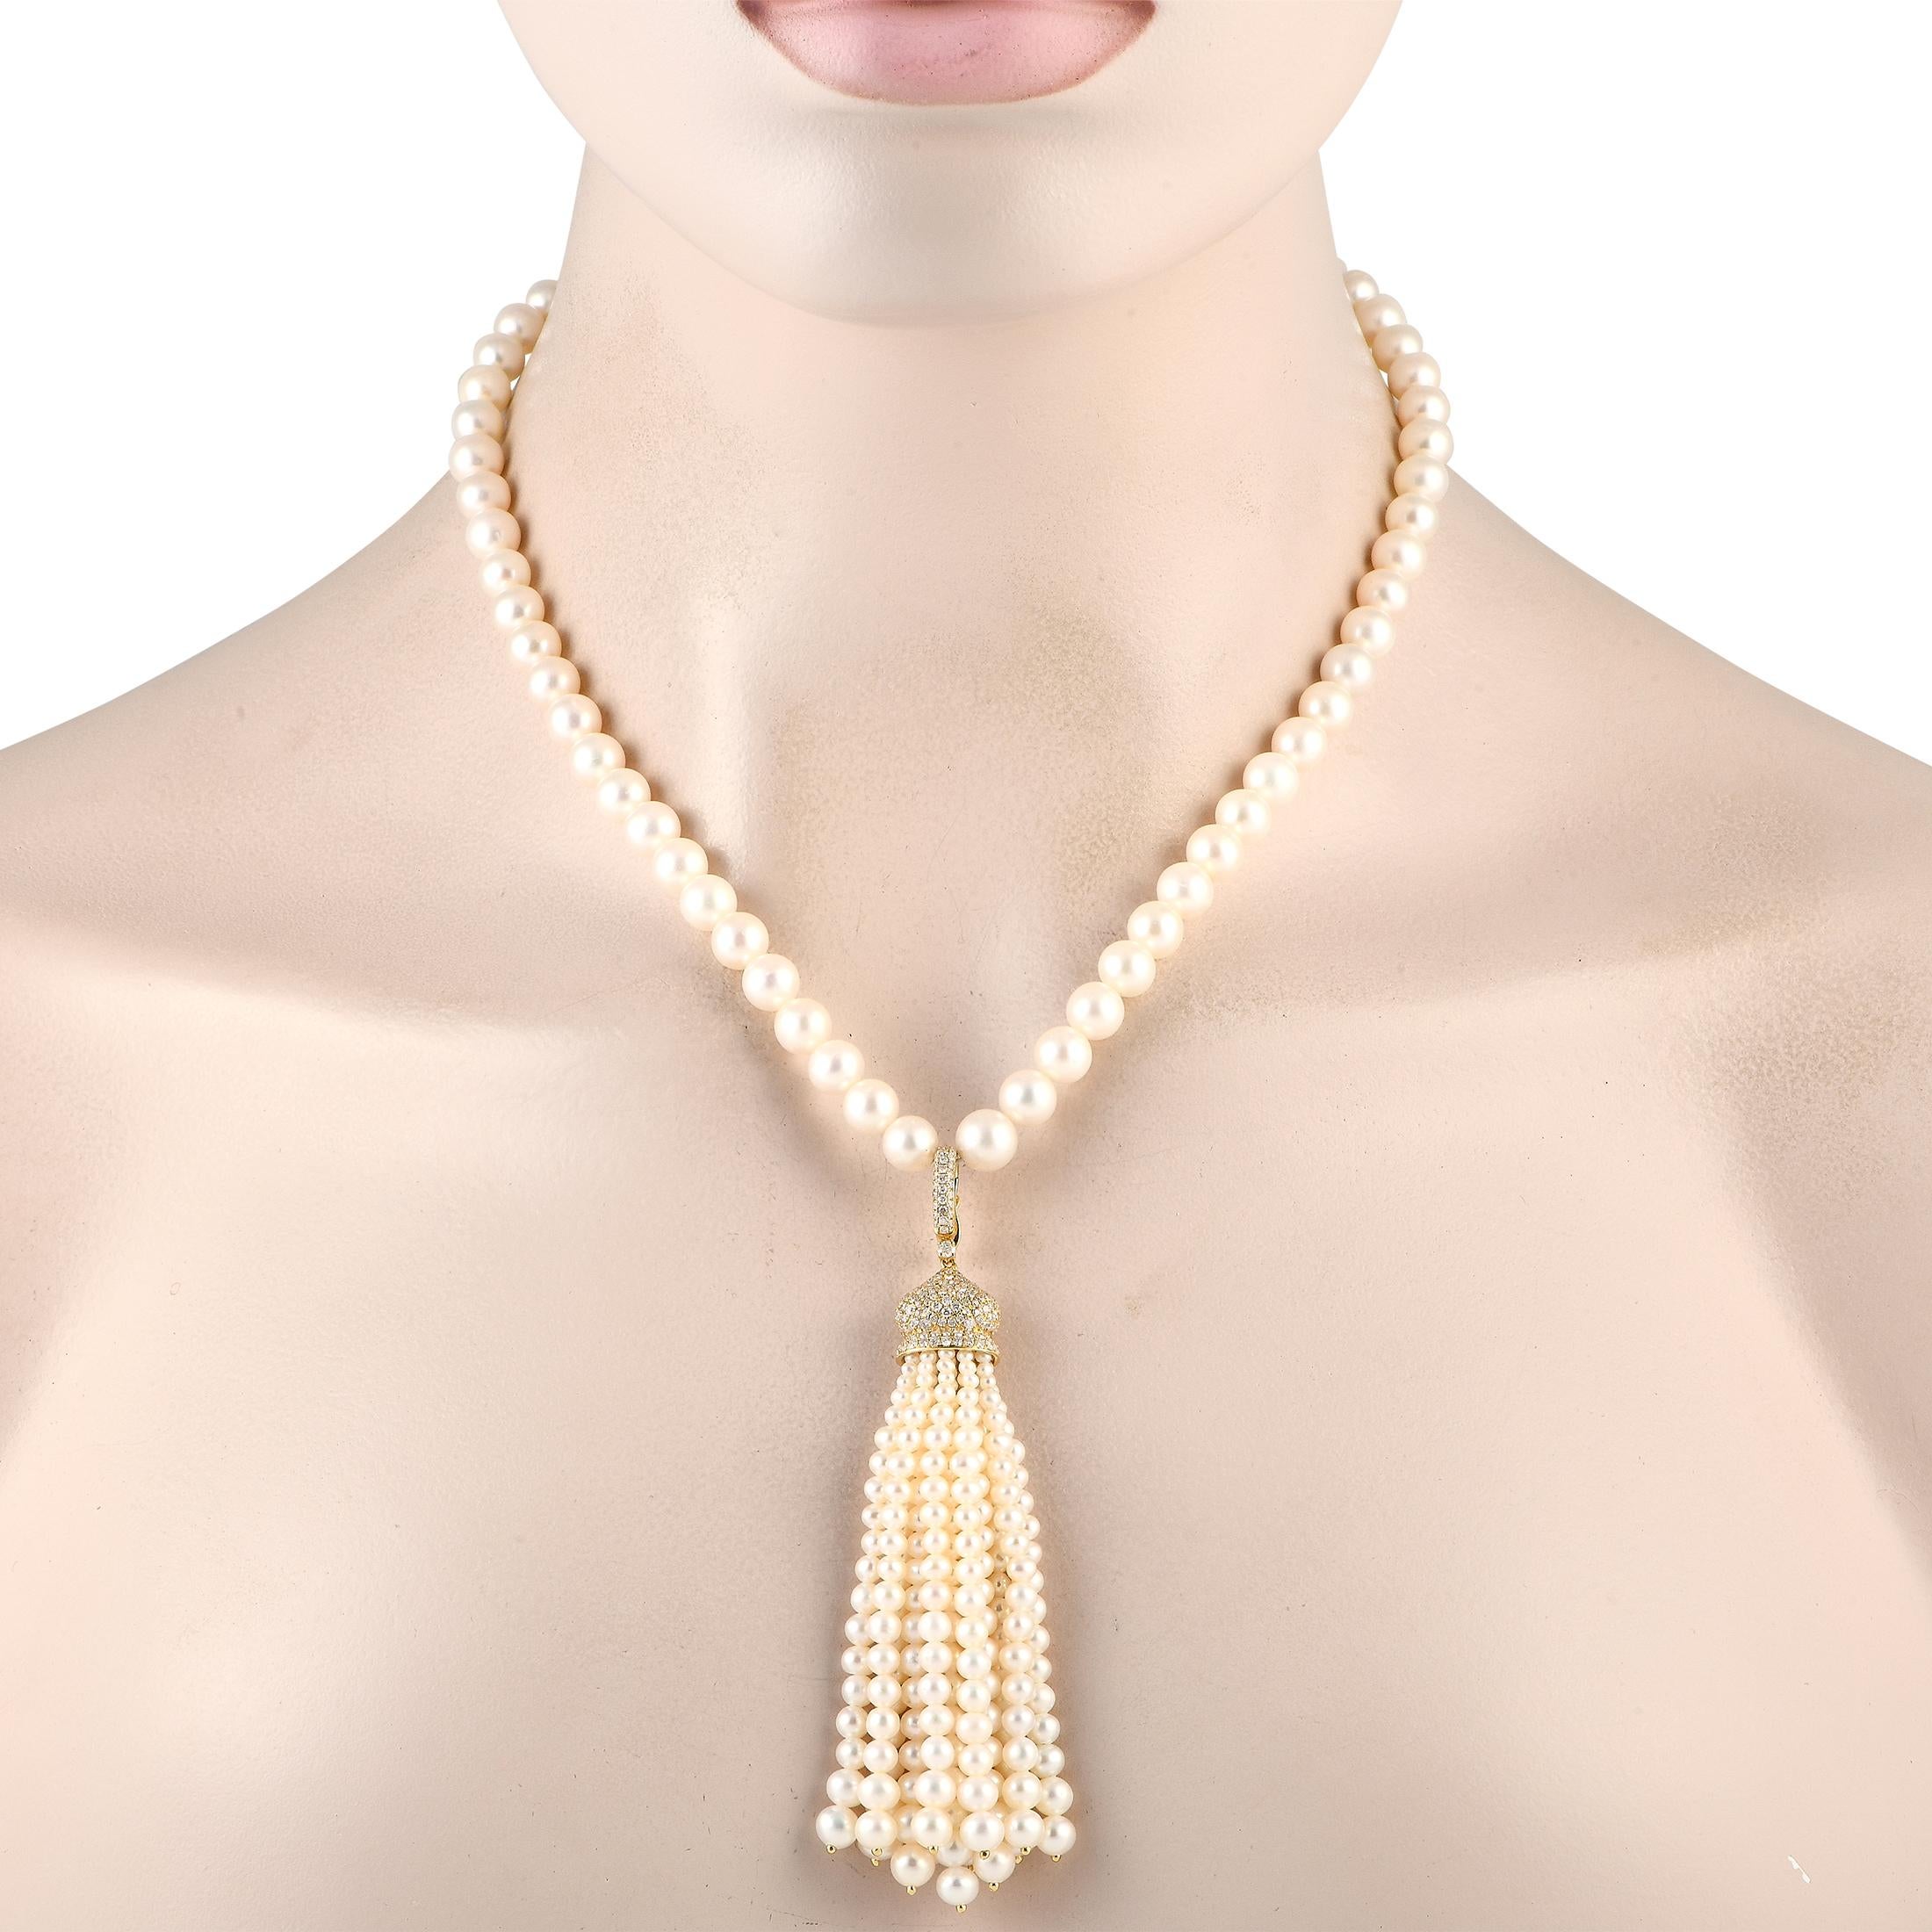 Wearing this LB Exclusive piece is an effortless way of taking your formal look to the next level. It features a strand of creamy white pearls on a necklace secured by a lobster clasp. It has a unique tassel pendant with a diamond-encrusted bail and